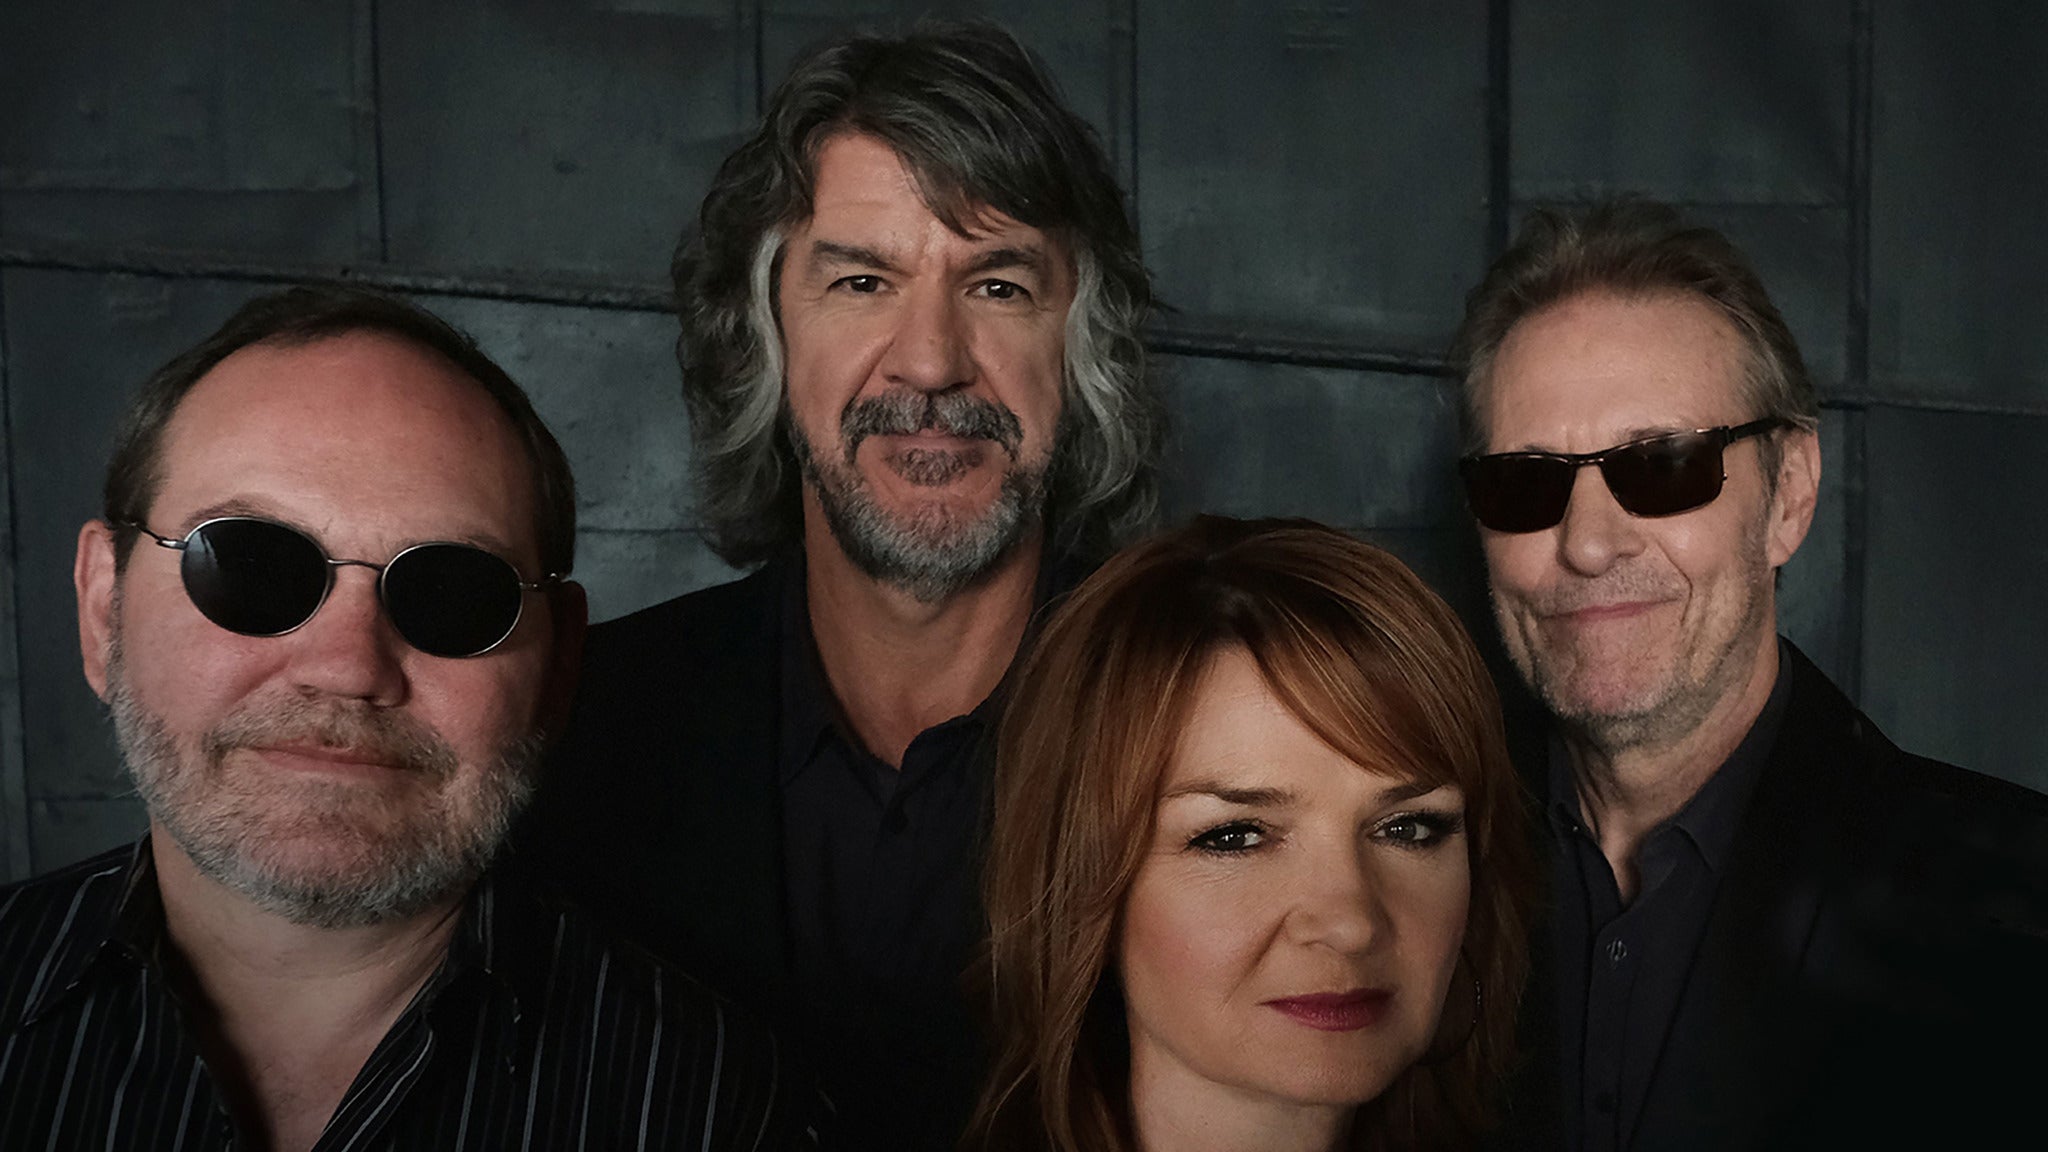 The Steeldrivers in Chattanooga promo photo for Official Platinum presale offer code